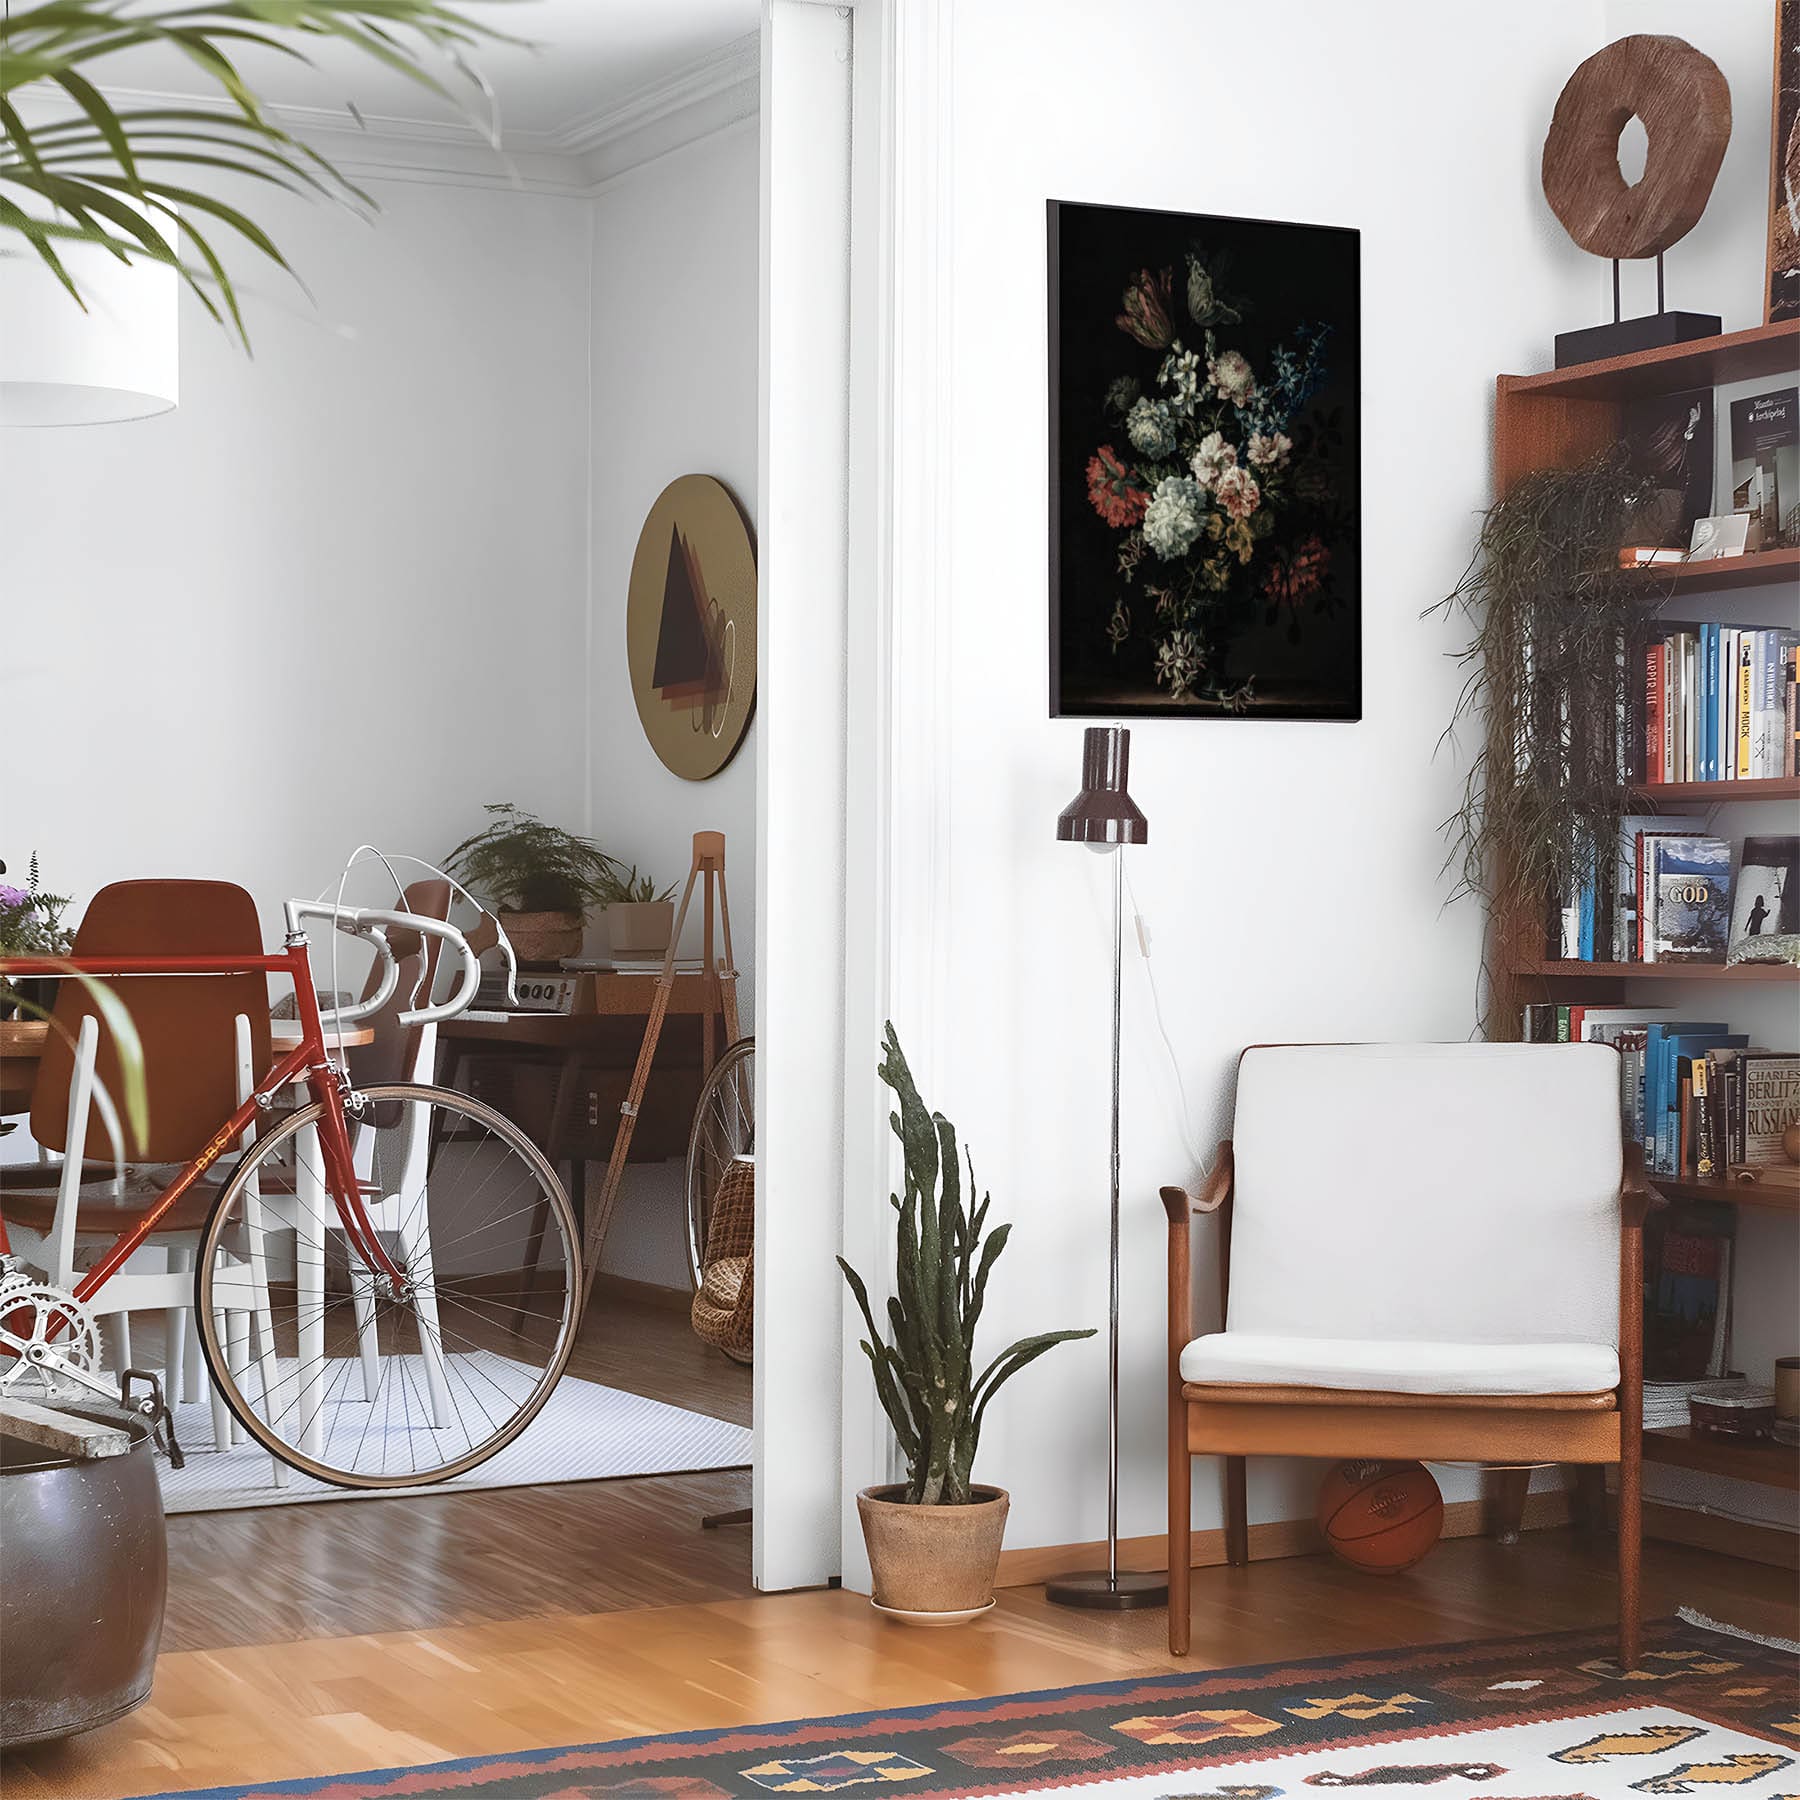 Eclectic living room with a road bike, bookshelf and house plants that features framed artwork of a Dark Still Life Flower above a chair and lamp